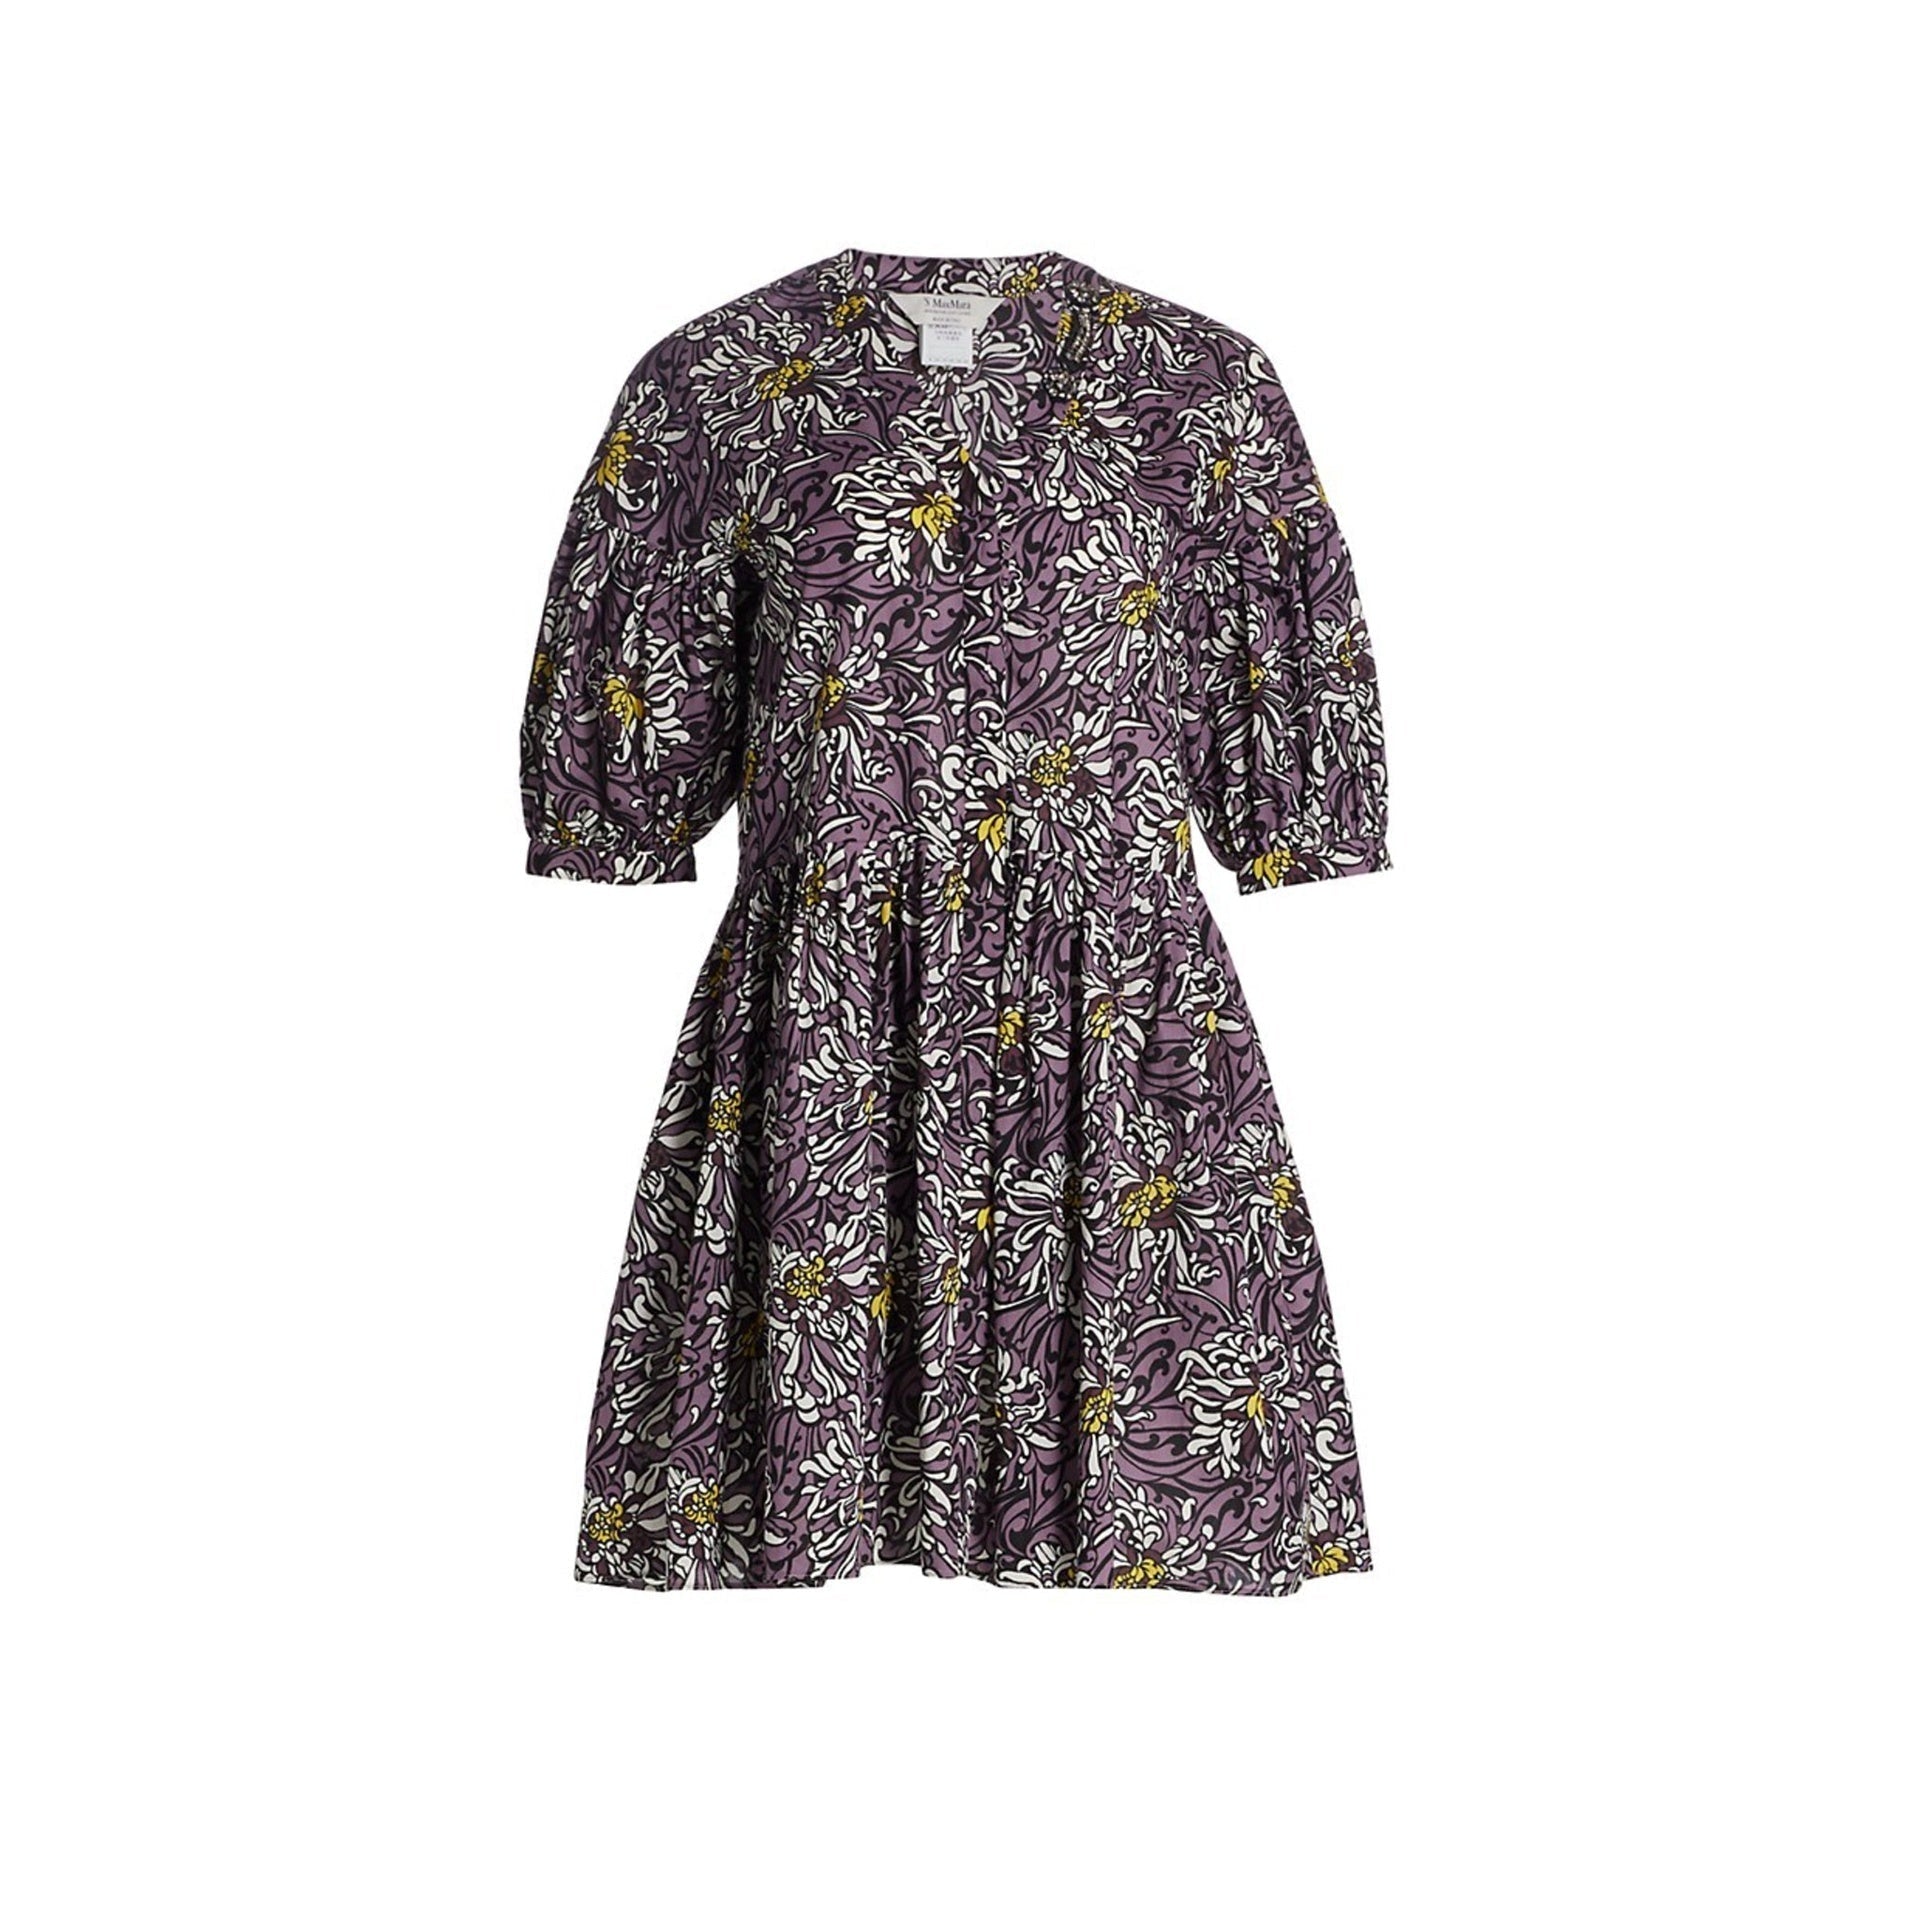 S-MAX-MARA-OUTLET-SALE-s-Max-Mara-Balenio-Floral-Longline-Blouse-WOMEN-CLOTHING-PURPLE-44-ARCHIVE-COLLECTION.jpg